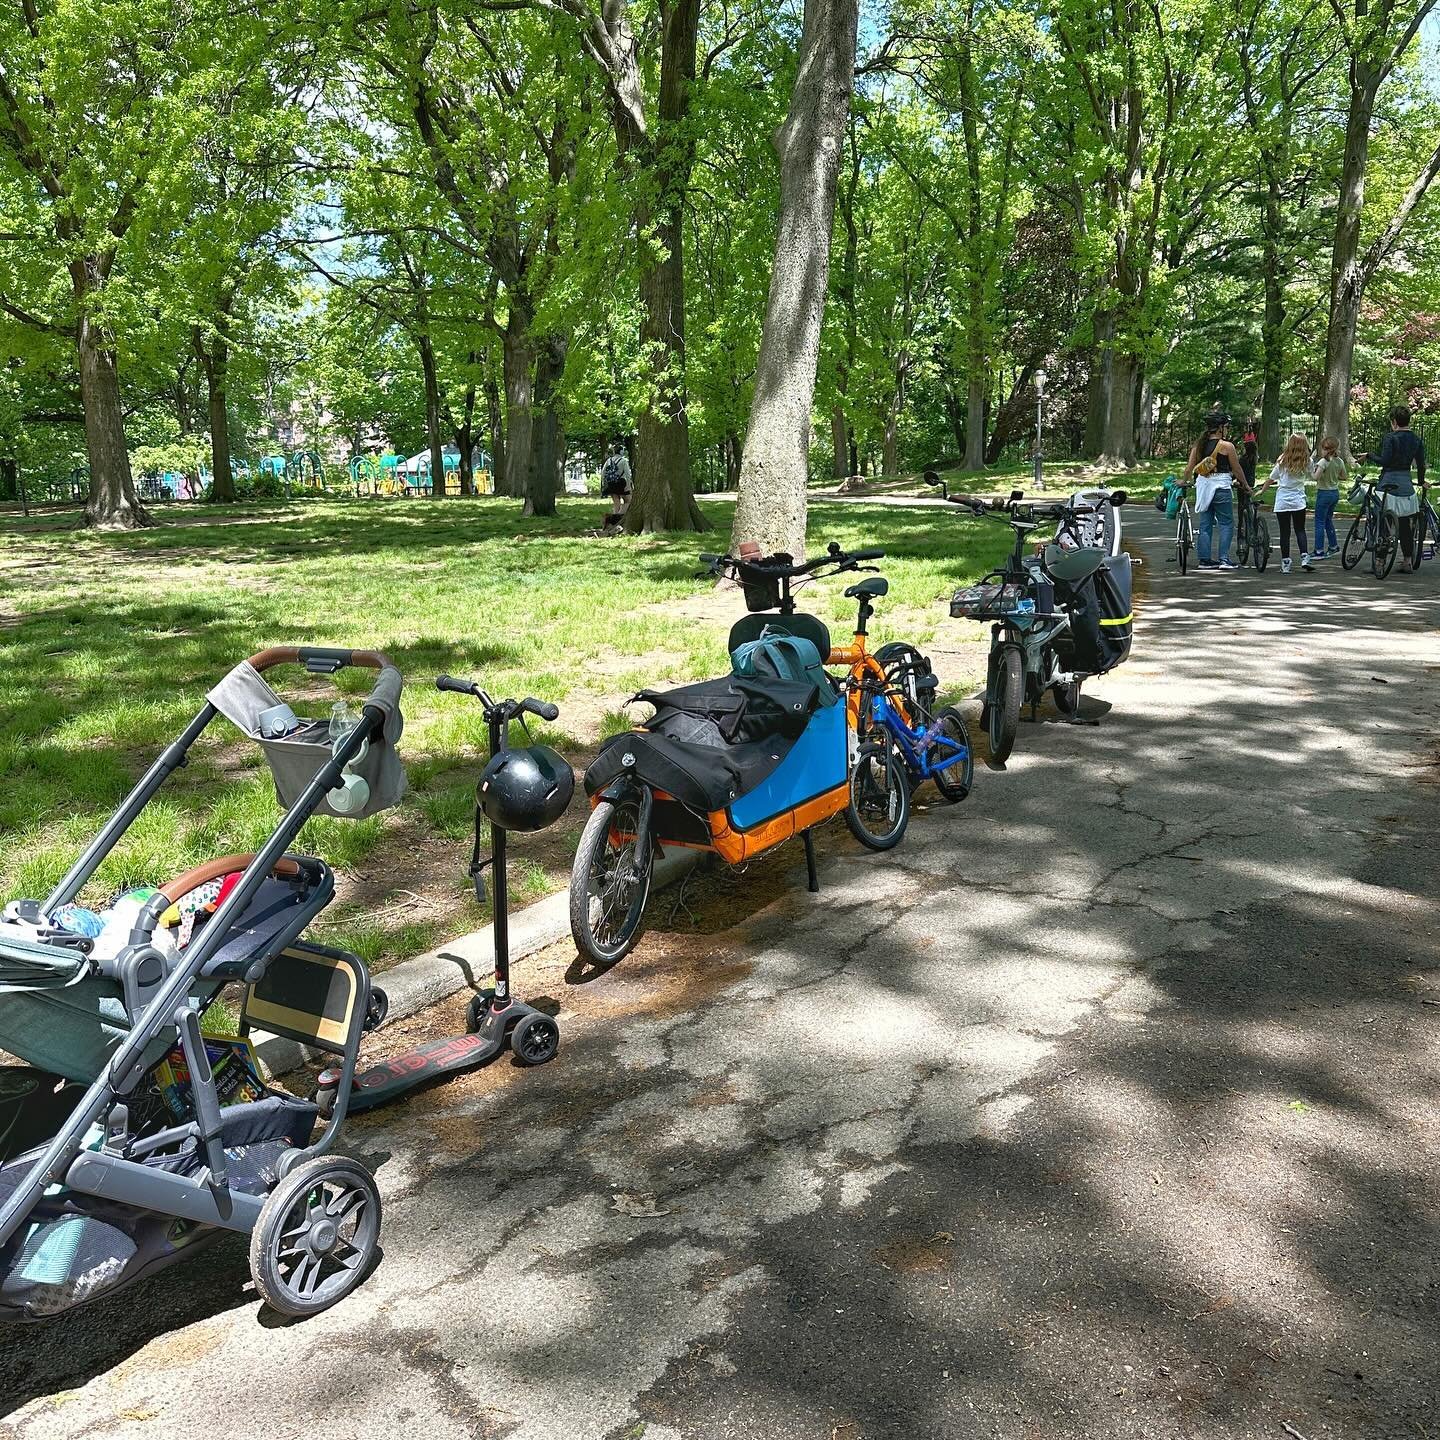 Strollers, scooters and bikes all regulars in Mount Prospect Park #greenspace #dontpavethepark #prospectheights #brooklyn